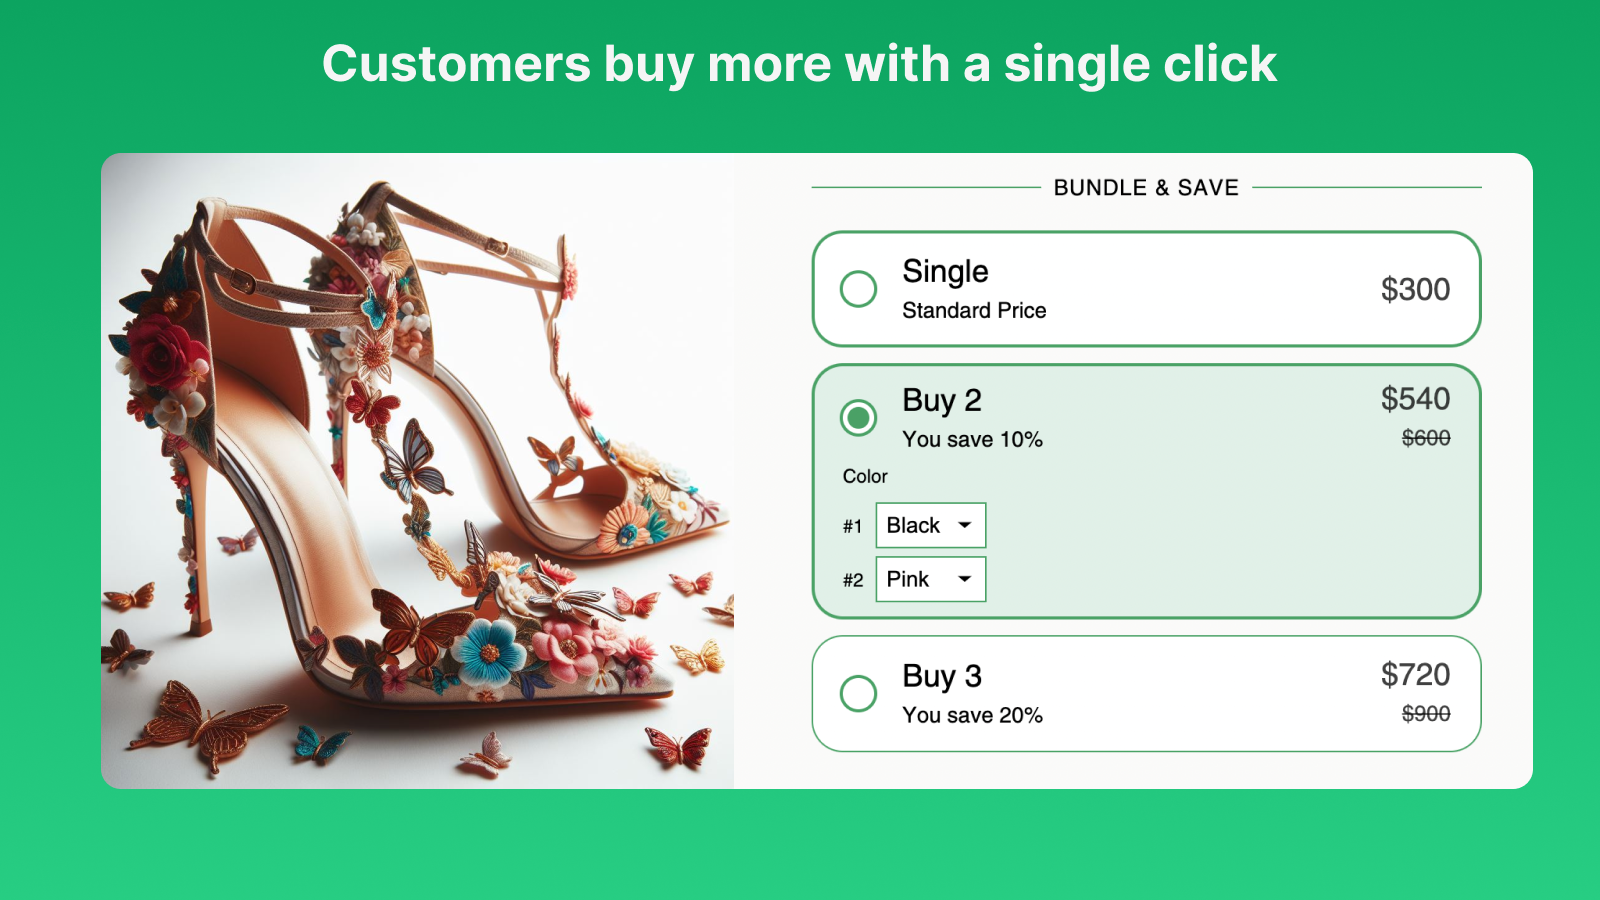 Customers buy more with a single click